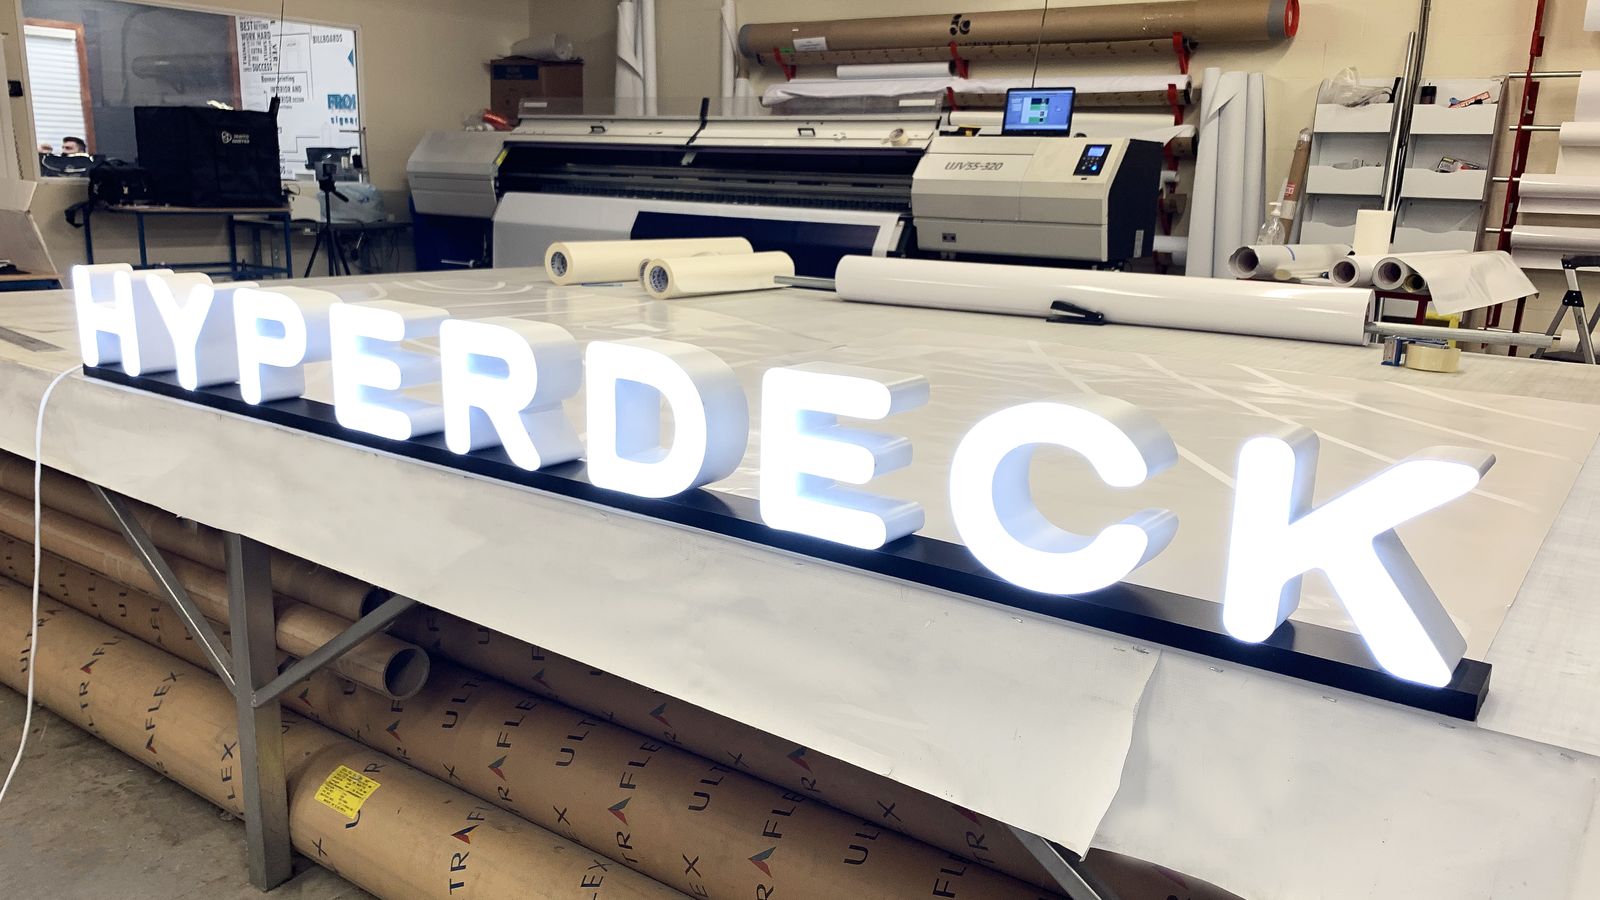 hyperdeck light up 3d letters stand